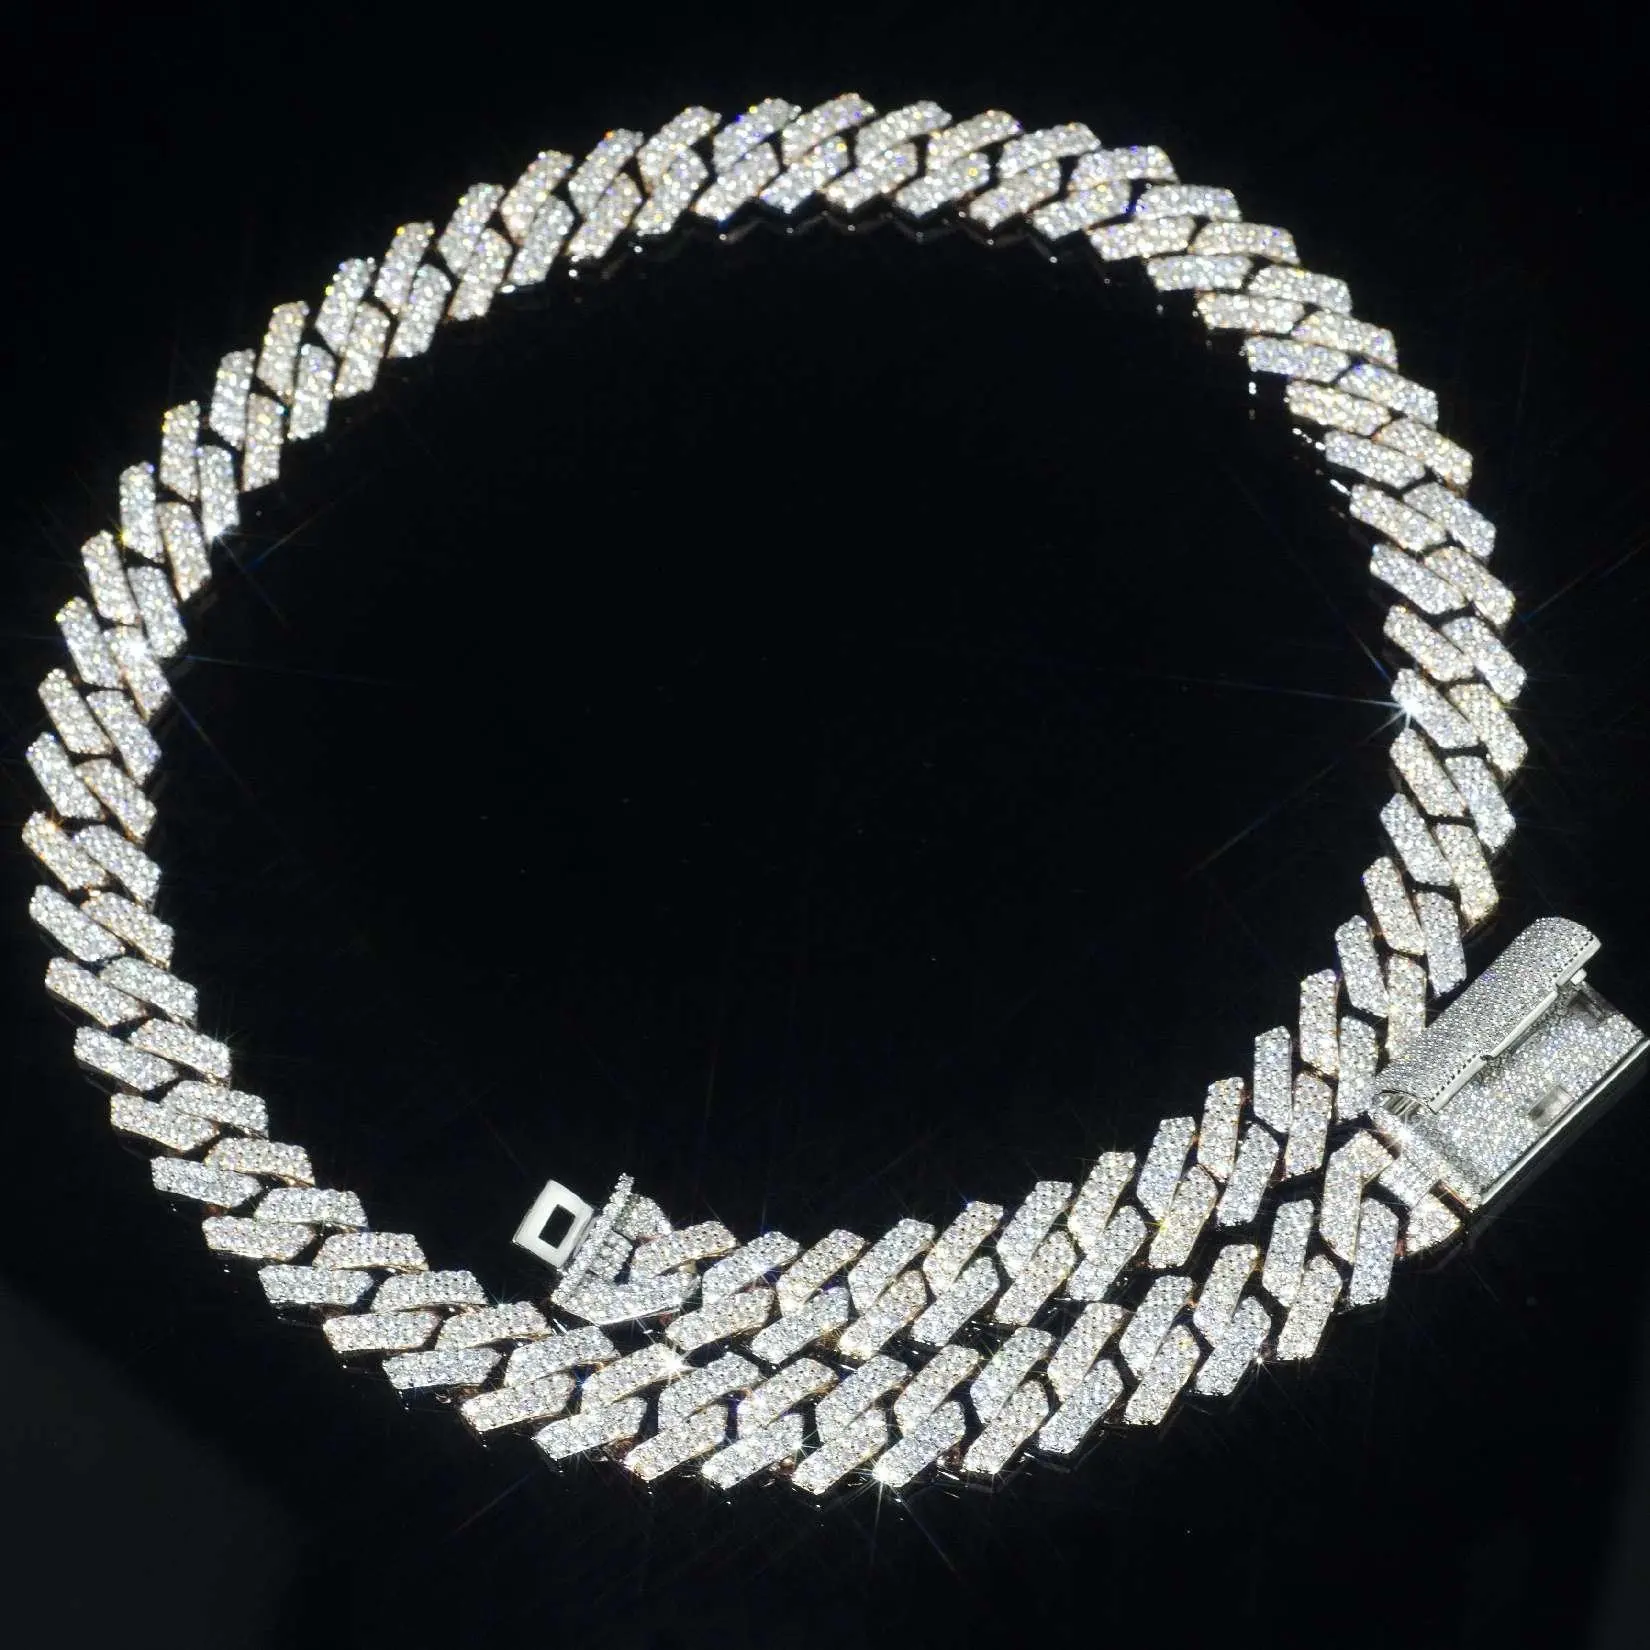 Factory Direct Offer on 10MM Silver Cuban Link Chain for a Versatile and Classic Accessory